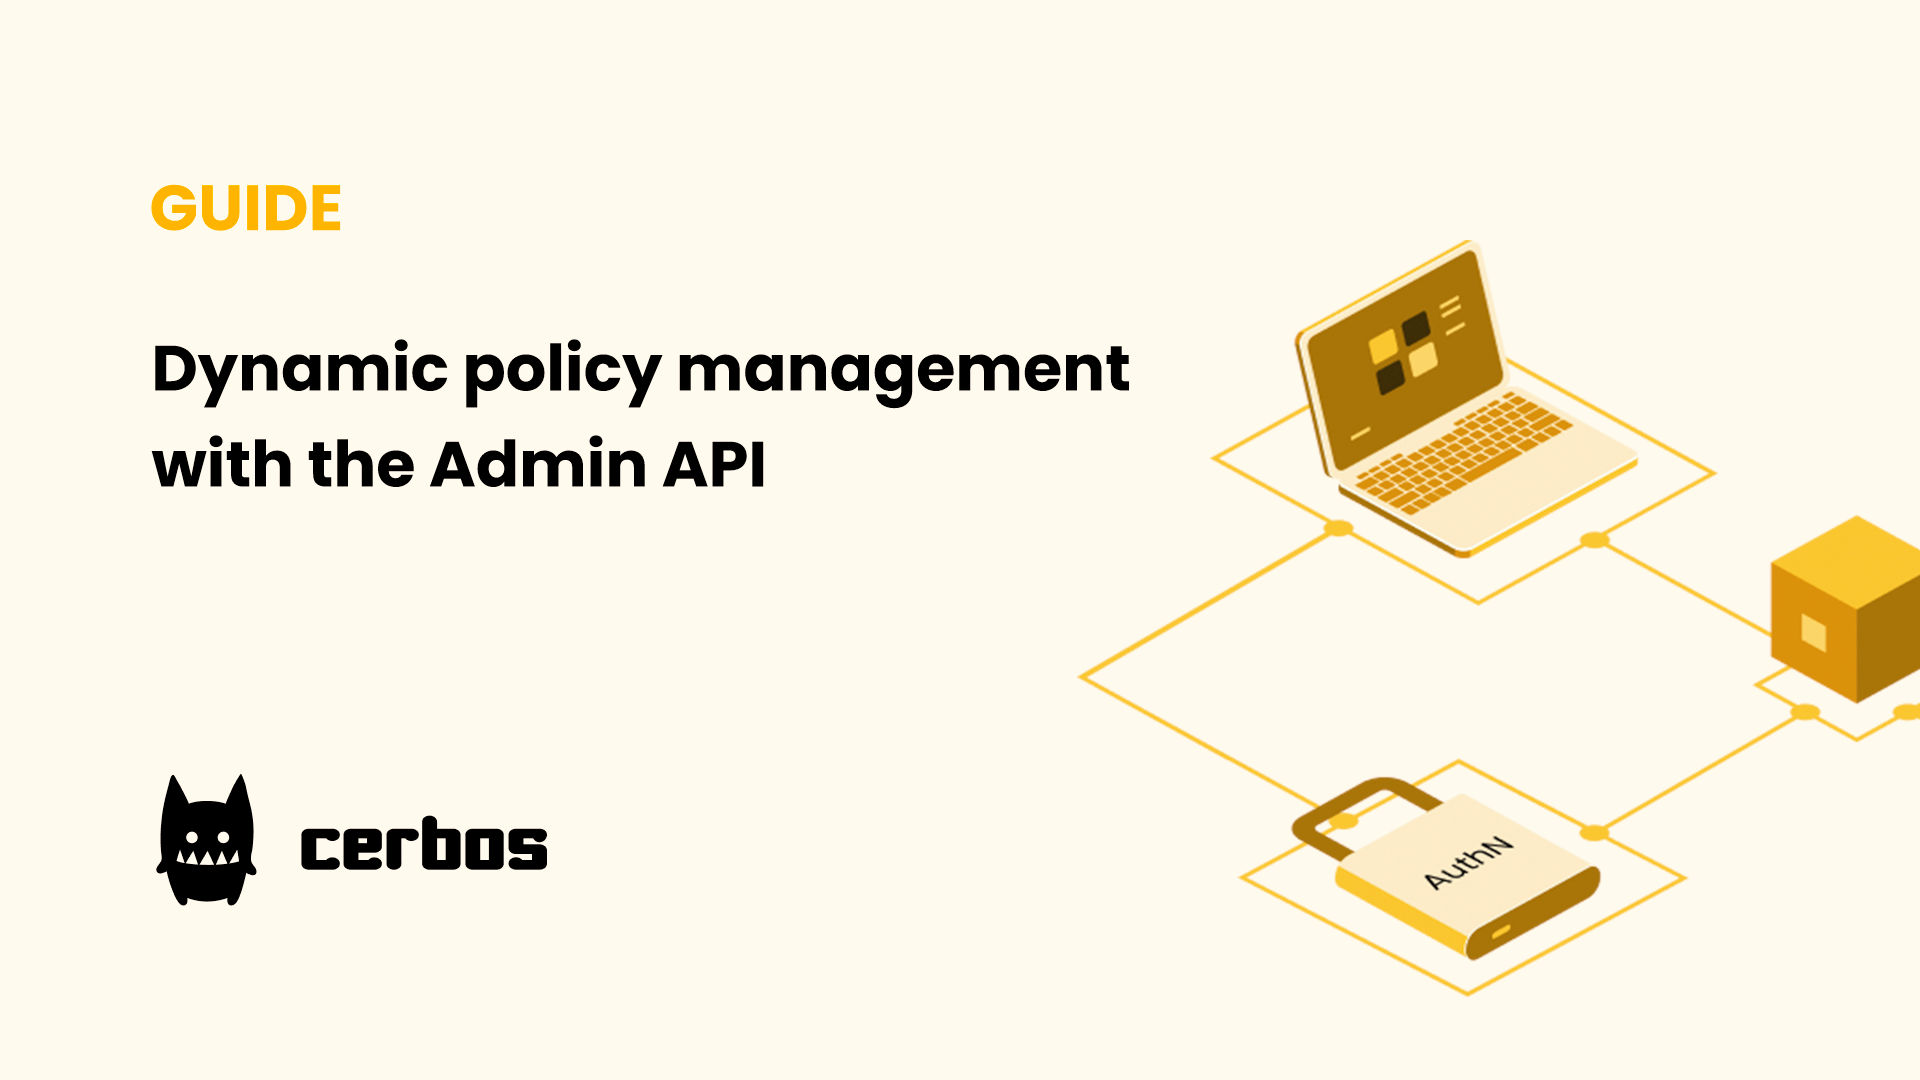 Dynamic policy management with the Admin API